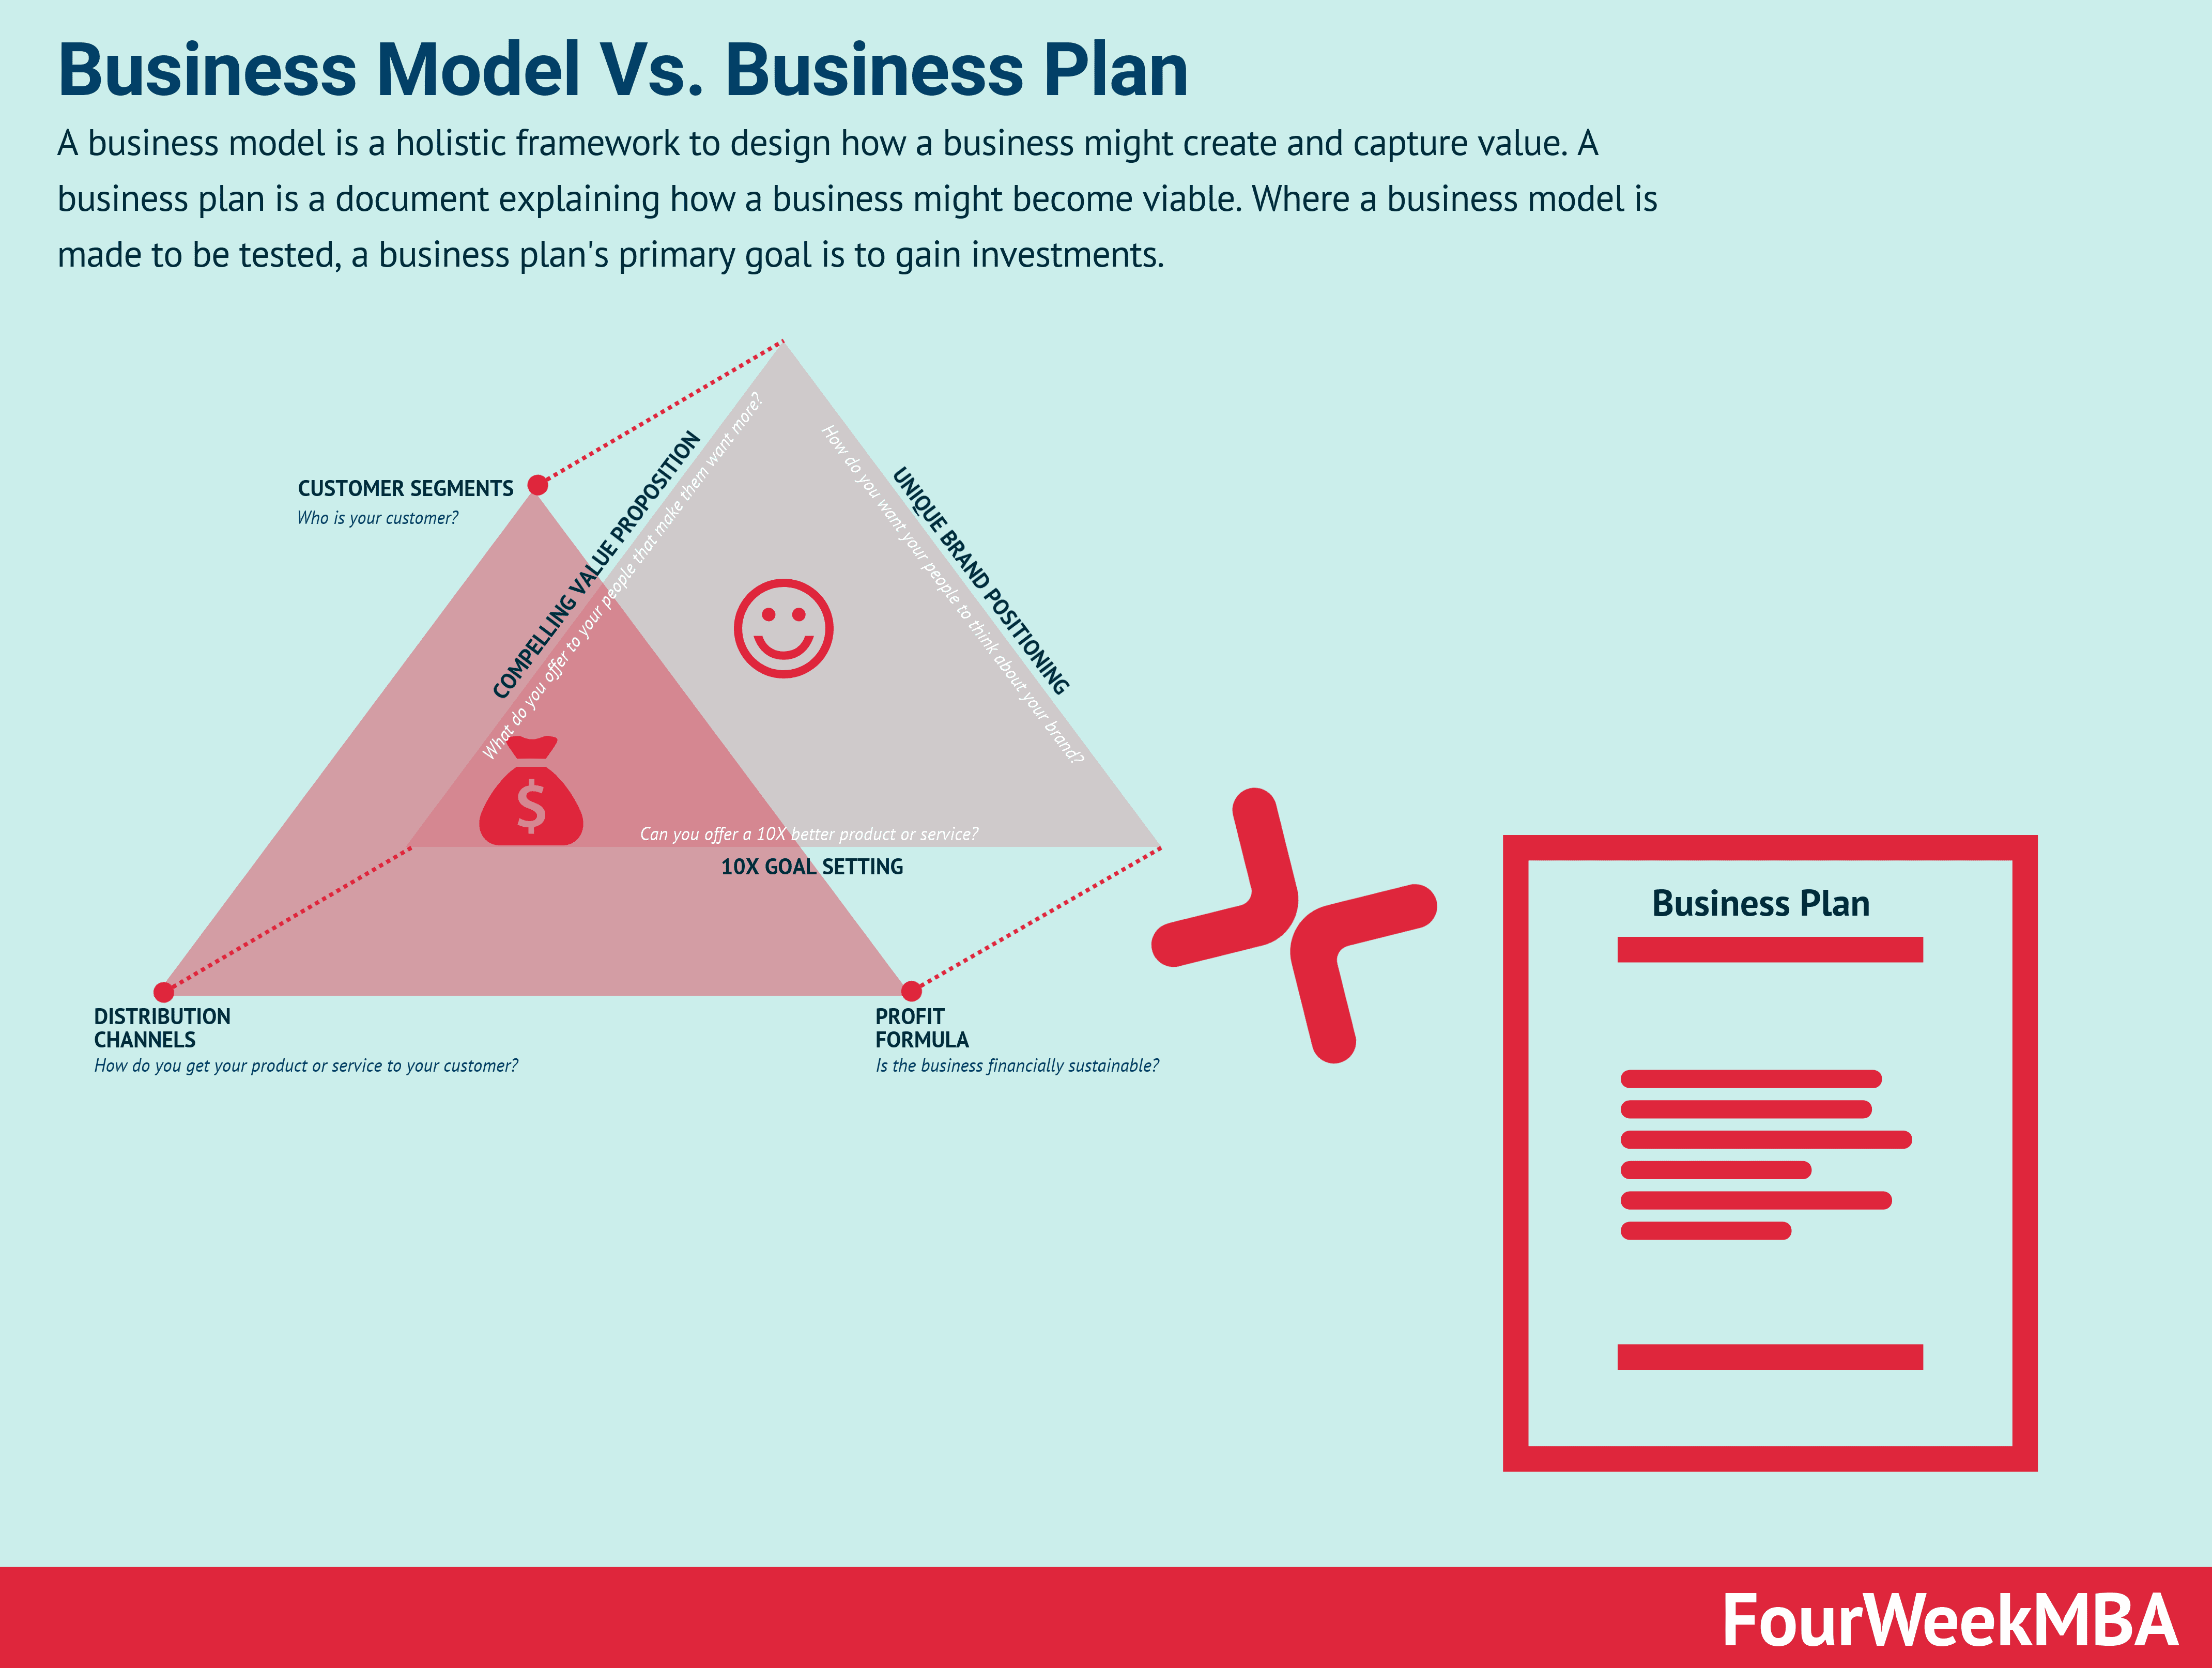 What Is A Business Model?